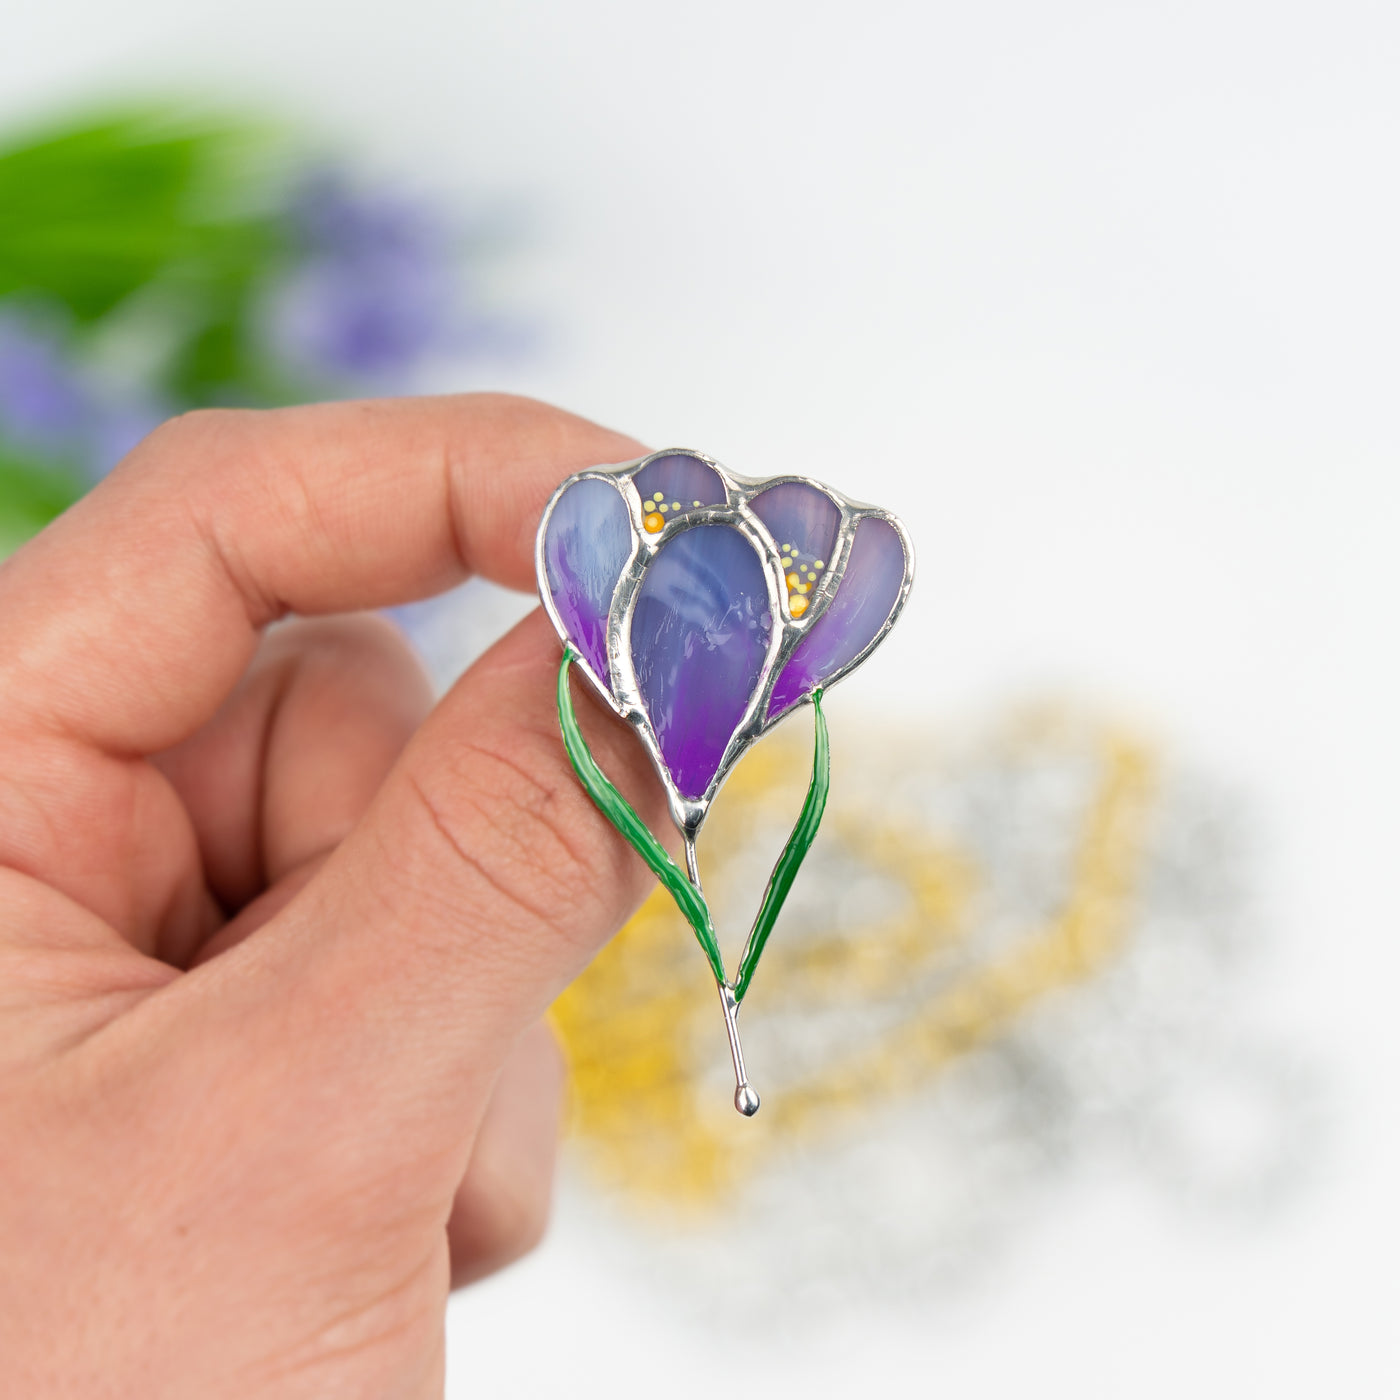 Zoomed stained glass crocus pin